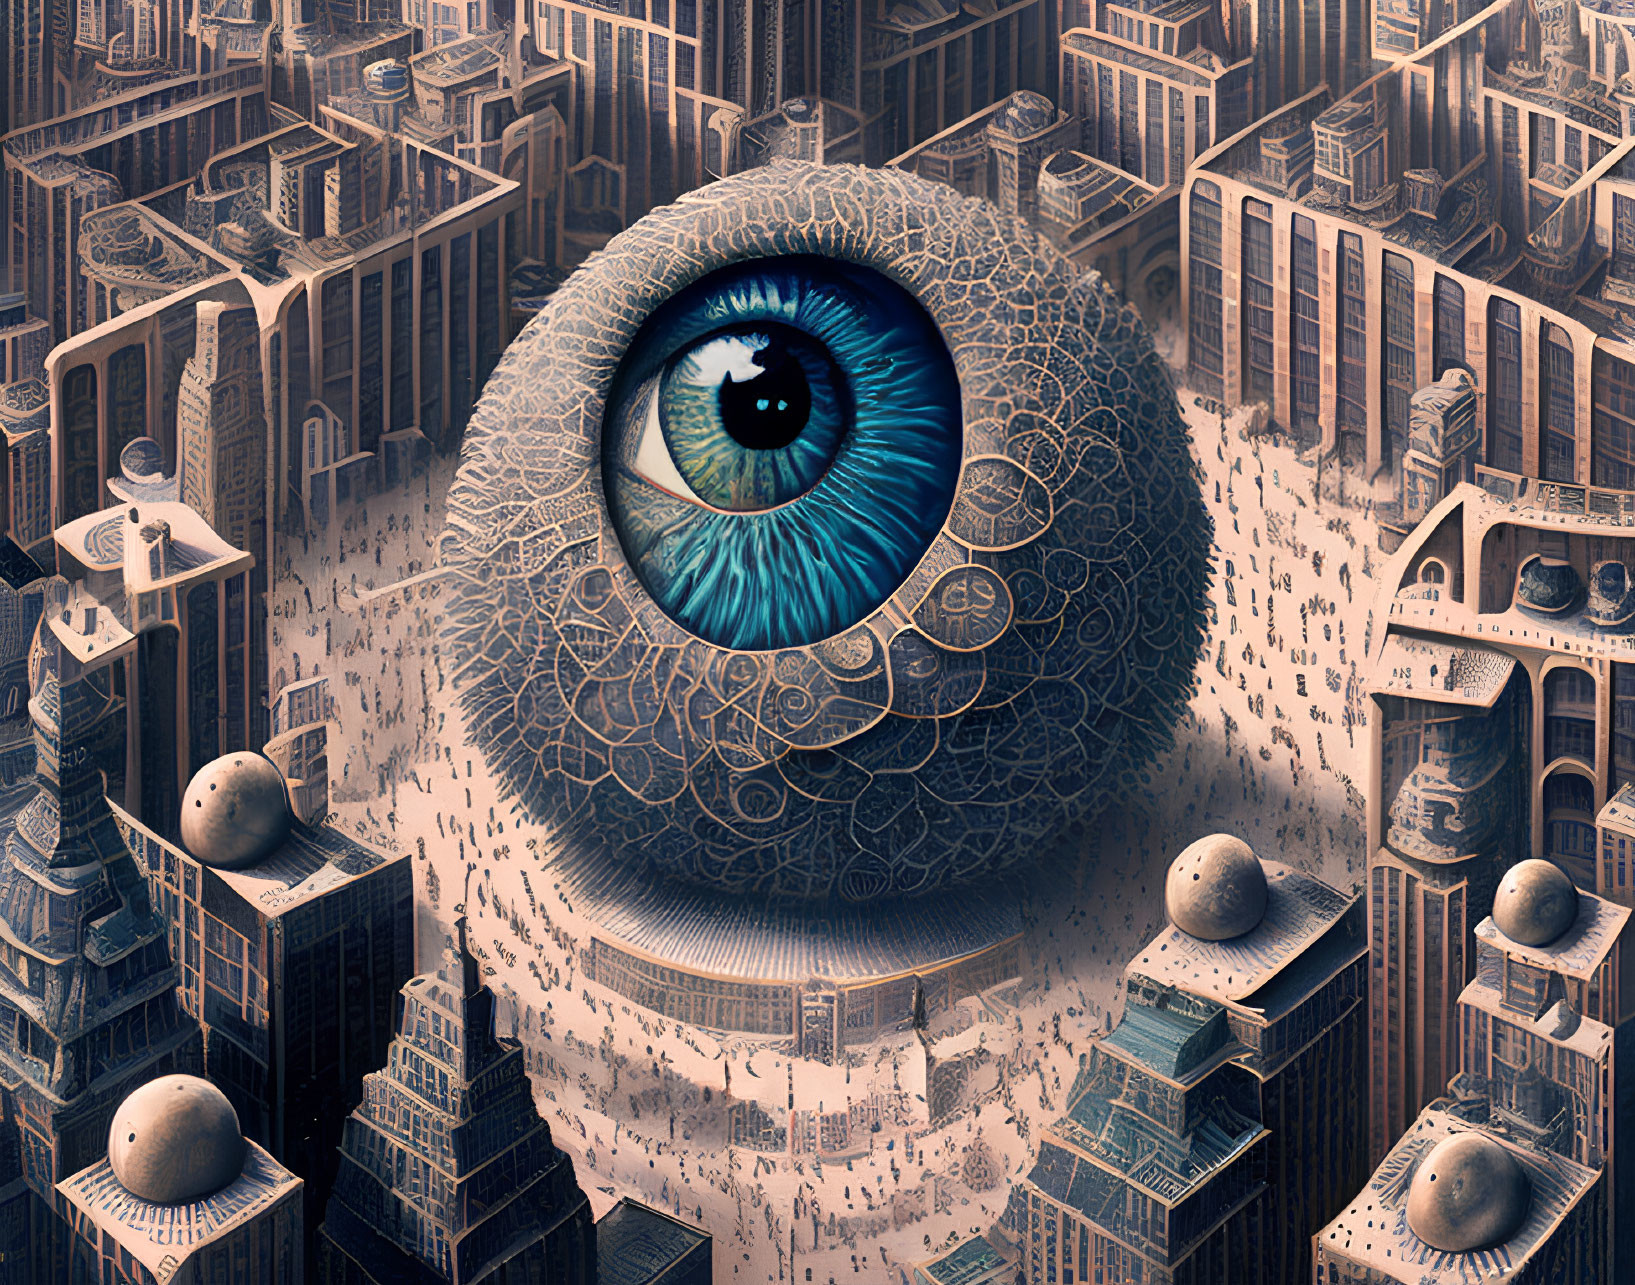 Surreal artwork featuring giant eye in urban labyrinth